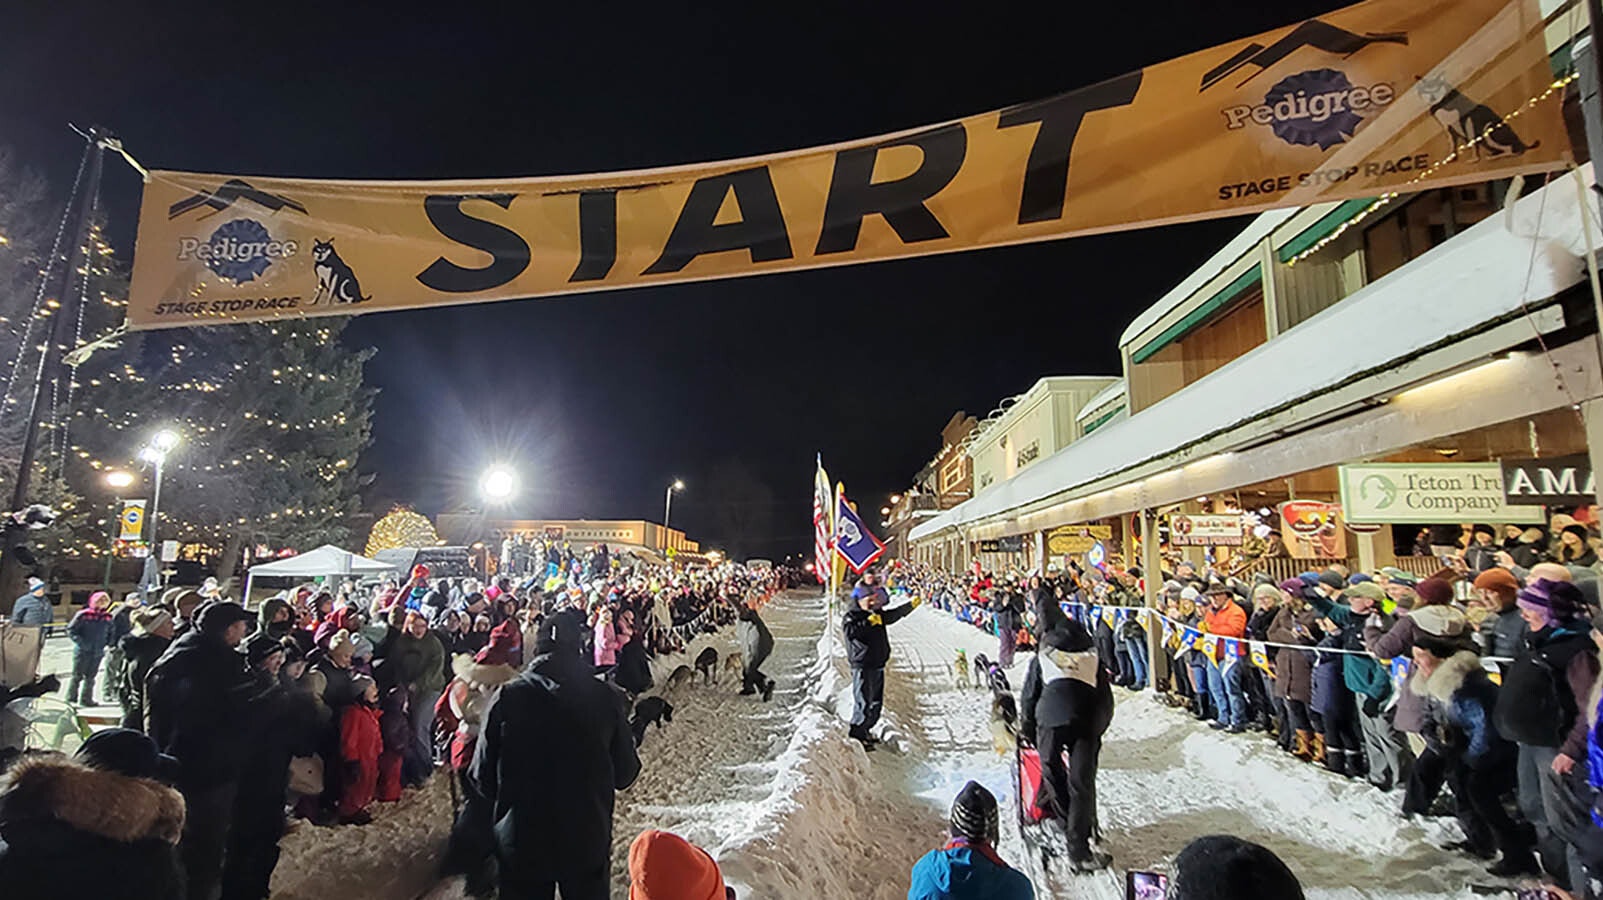 Ceremonial start of the Pedigree Stage Stop Sled Dog Race in downtown Jackson, Wyoming.